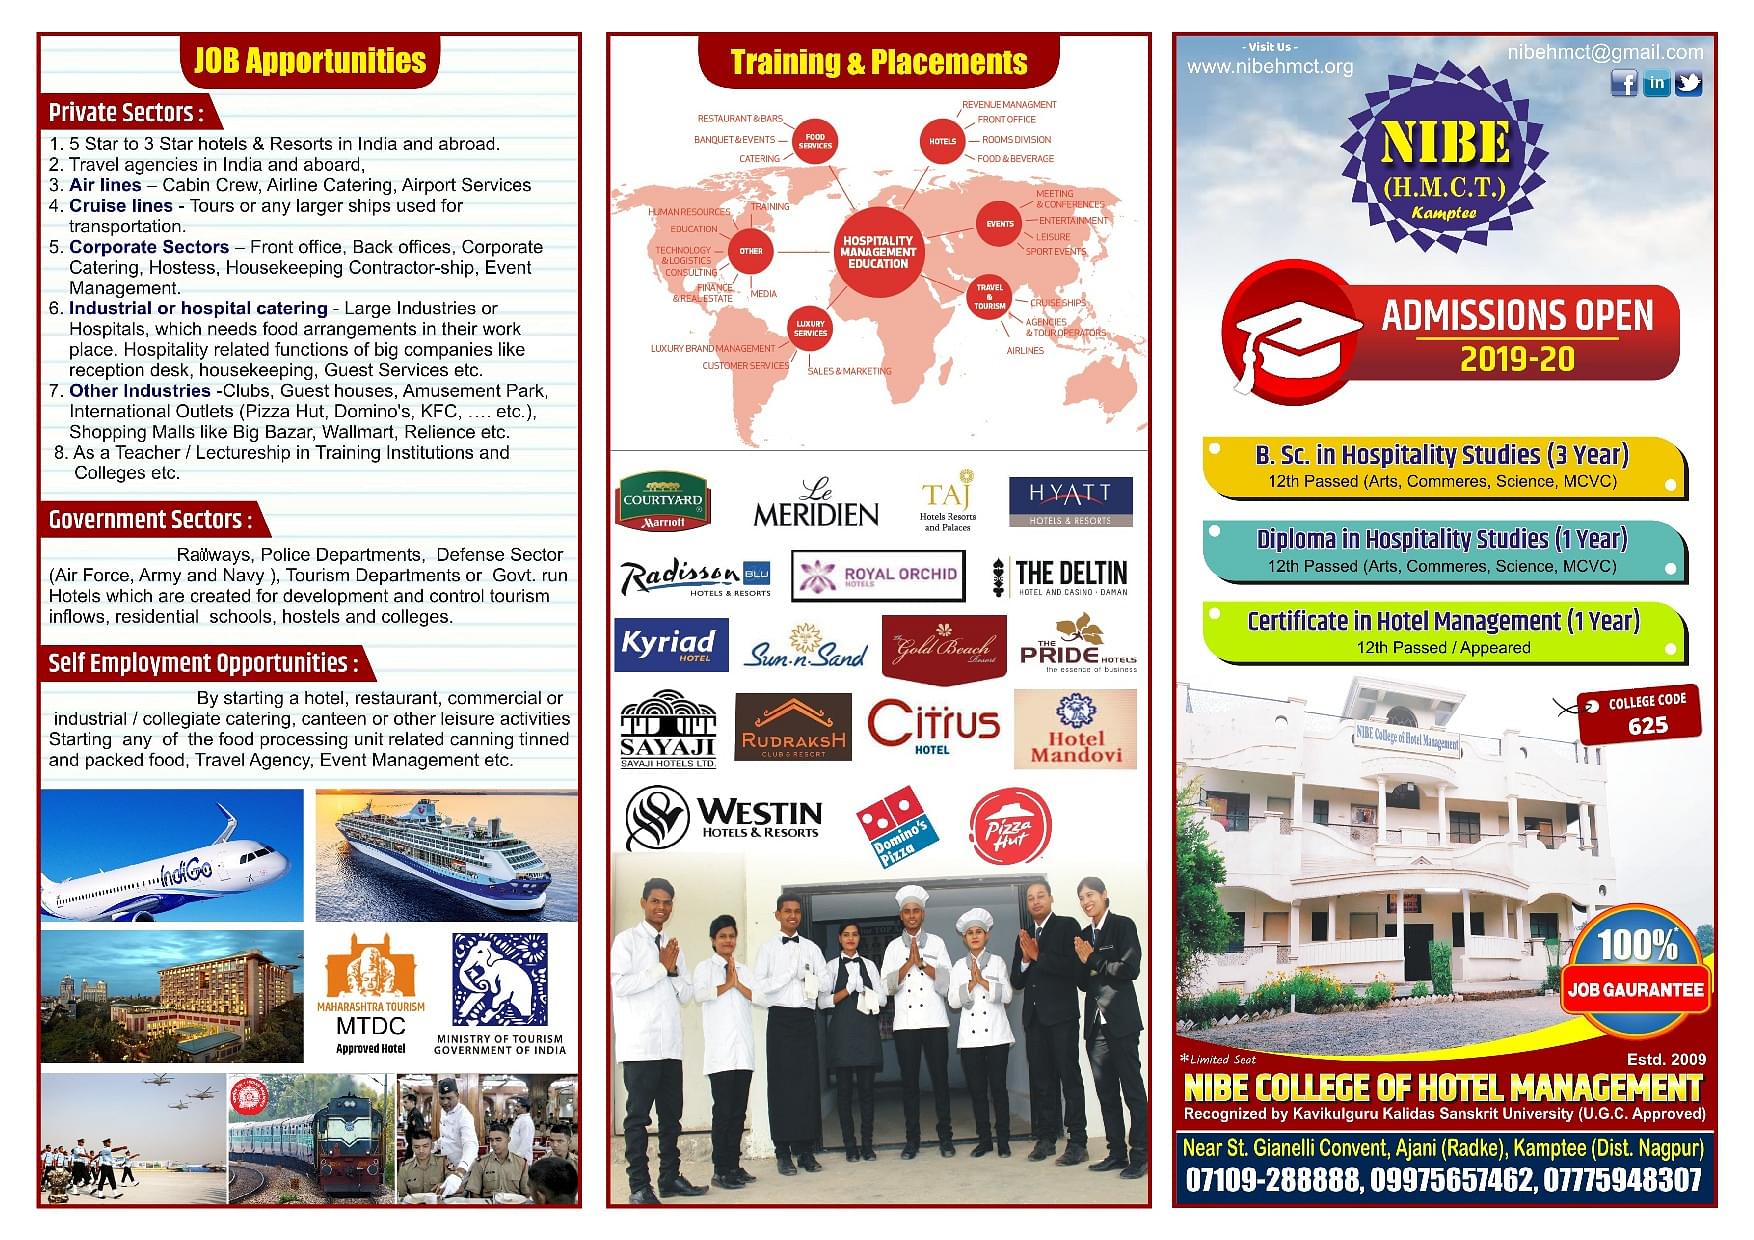 NIBE College of Hotel Management, Nagpur - Admissions, Contact, Website